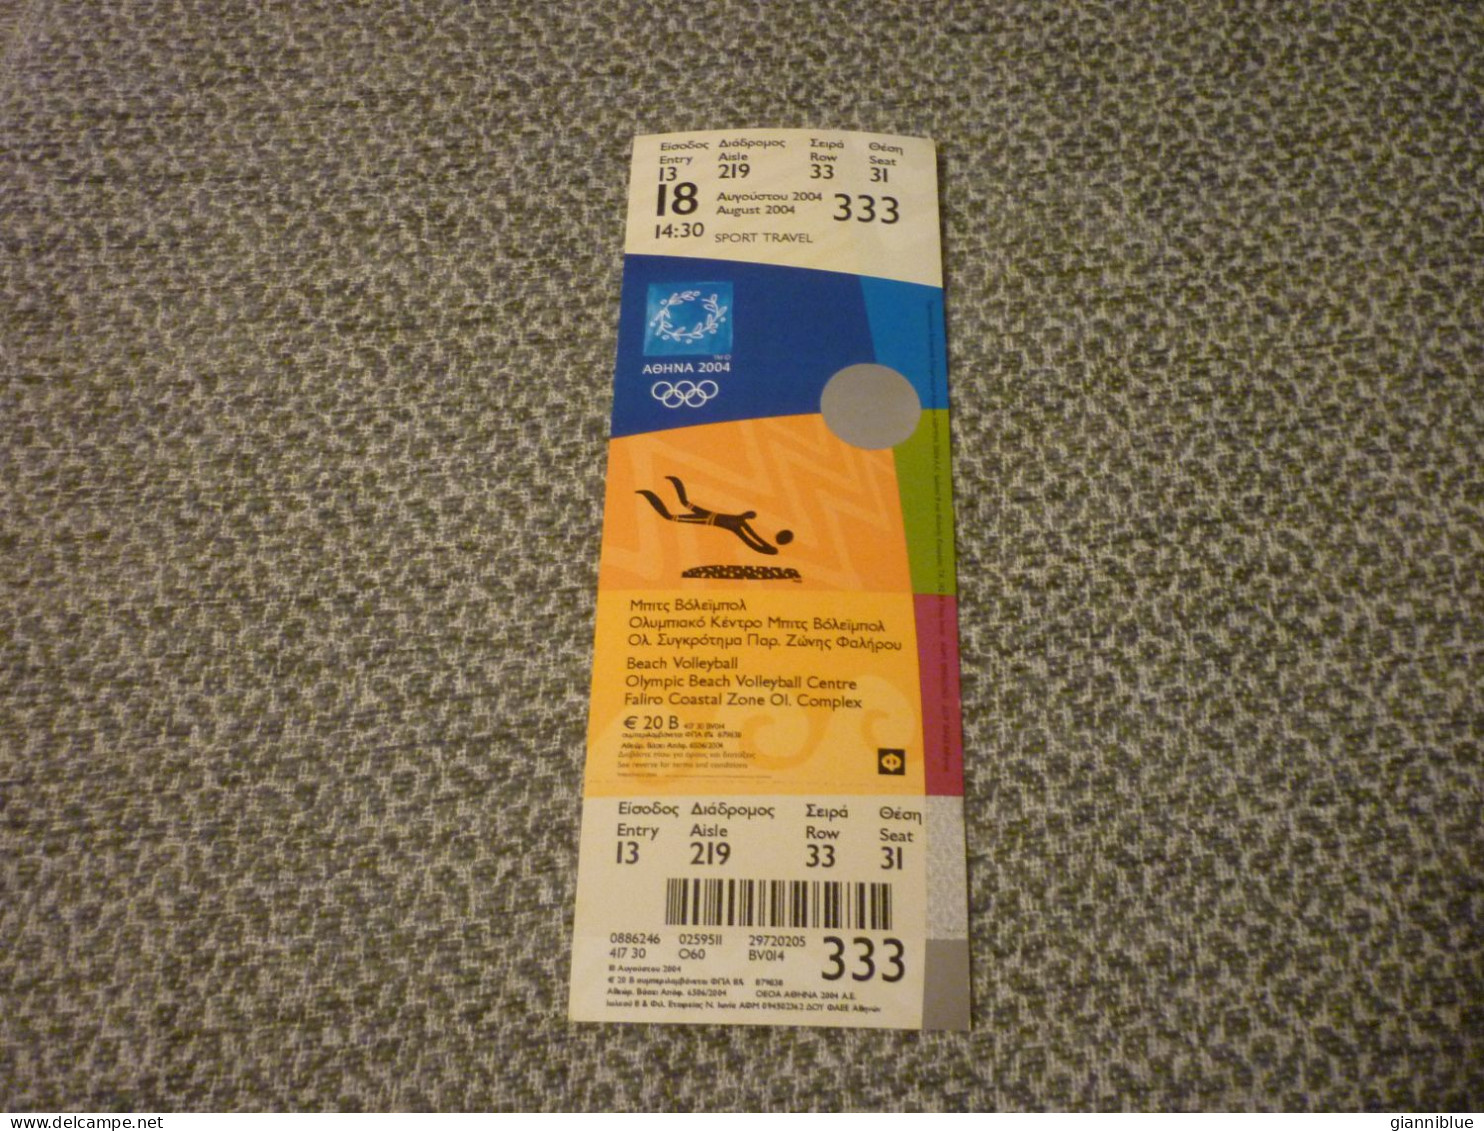 Beach Volleyball Athens 2004 Olympic Games Greece Greek Mint Unused Match Ticket Stub 18/08/2004 14:30 #333 - Kleding, Souvenirs & Andere